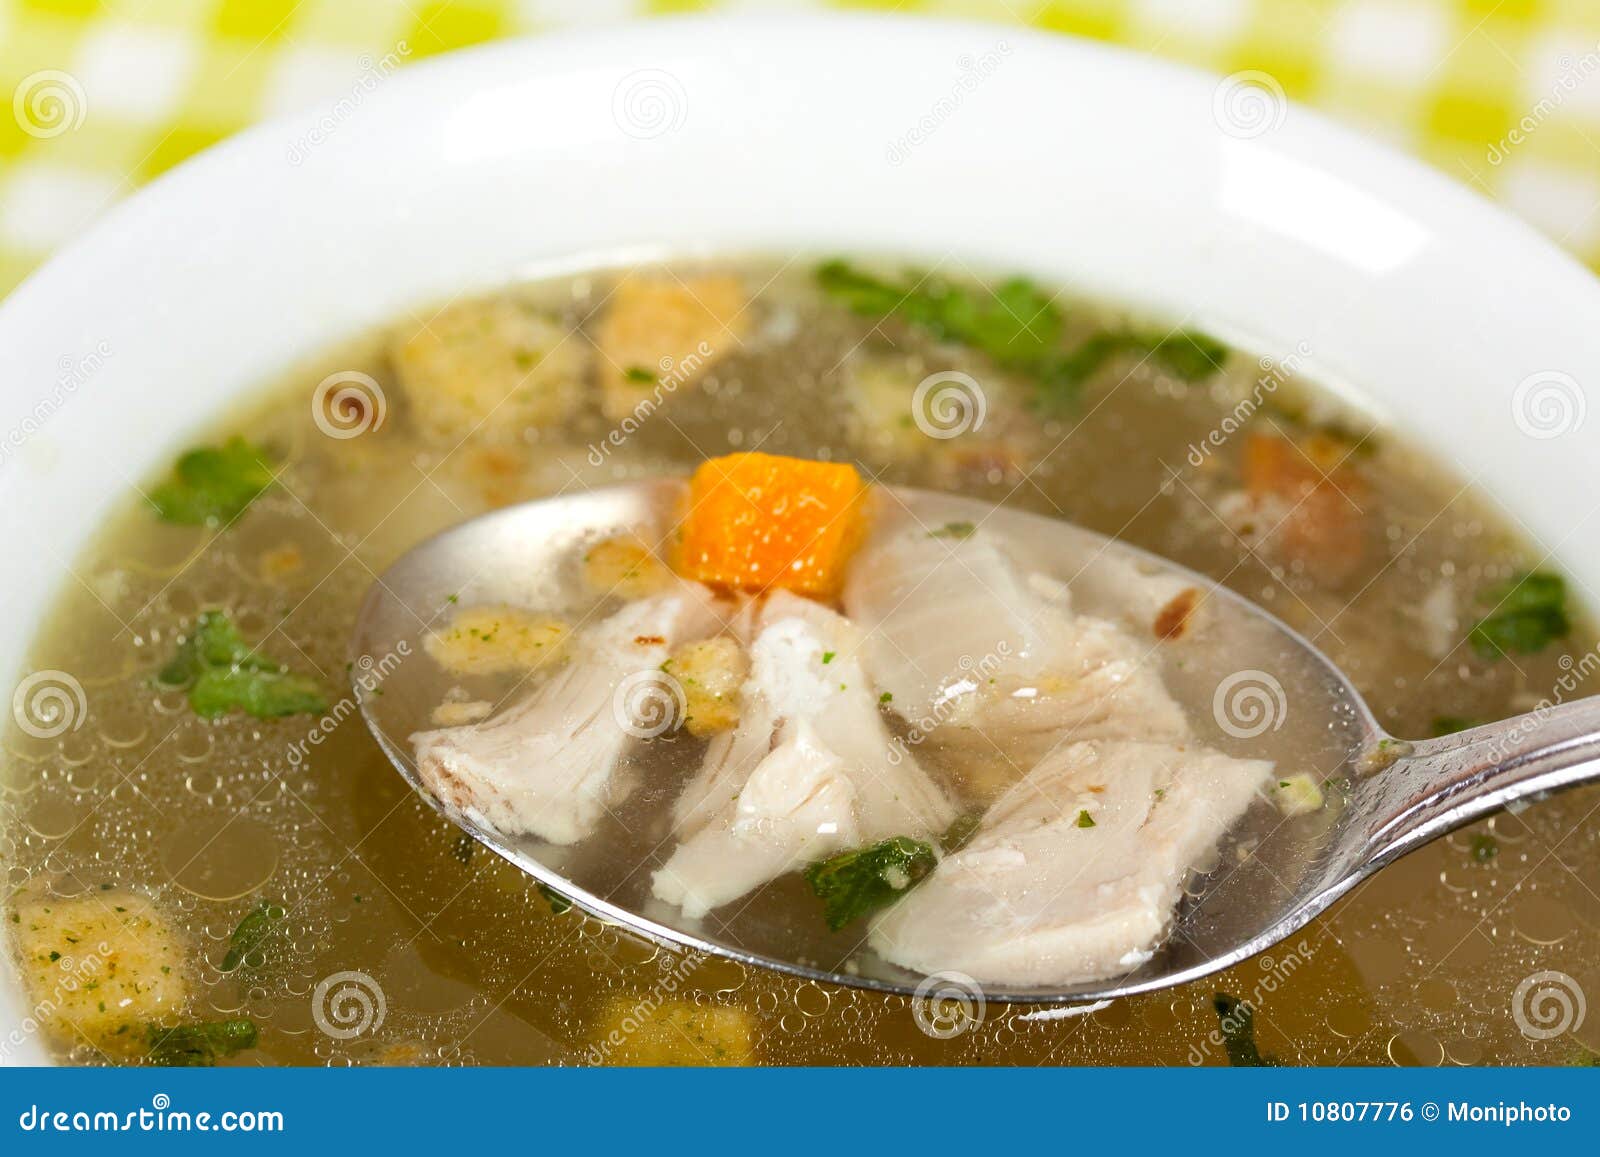 a bowl of chicken soup with selective focus